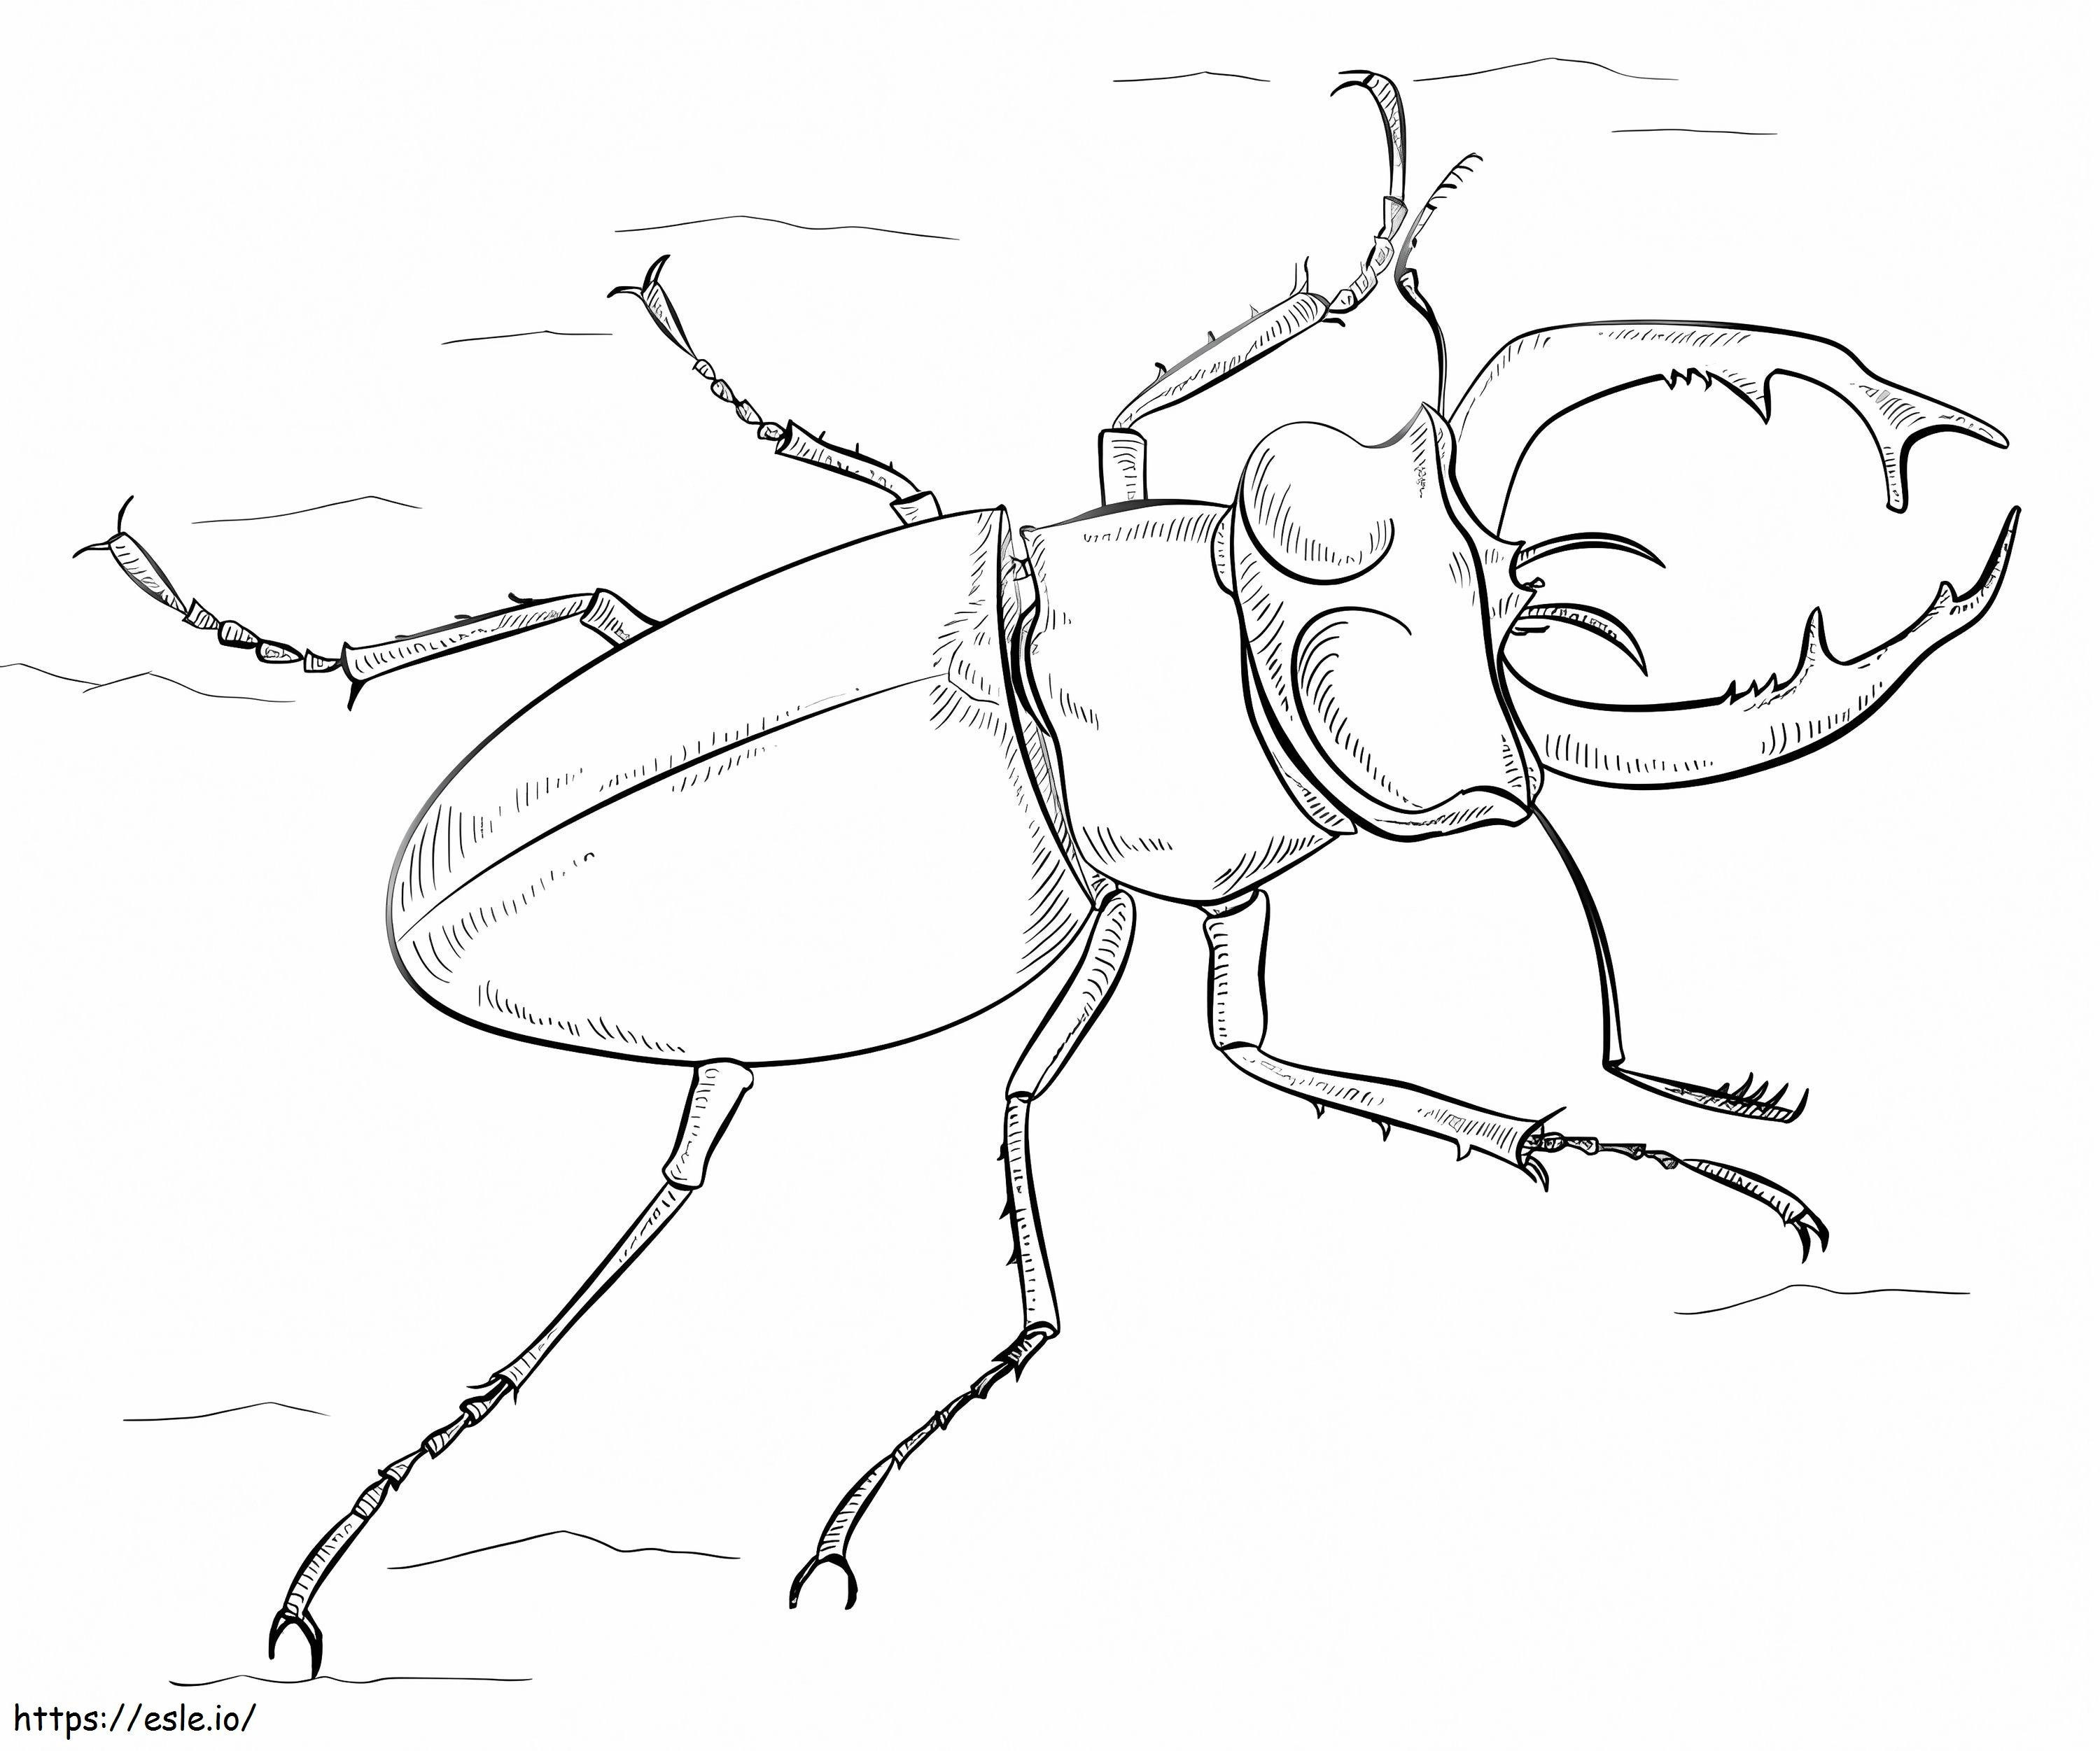 Black Stag Beetle coloring page